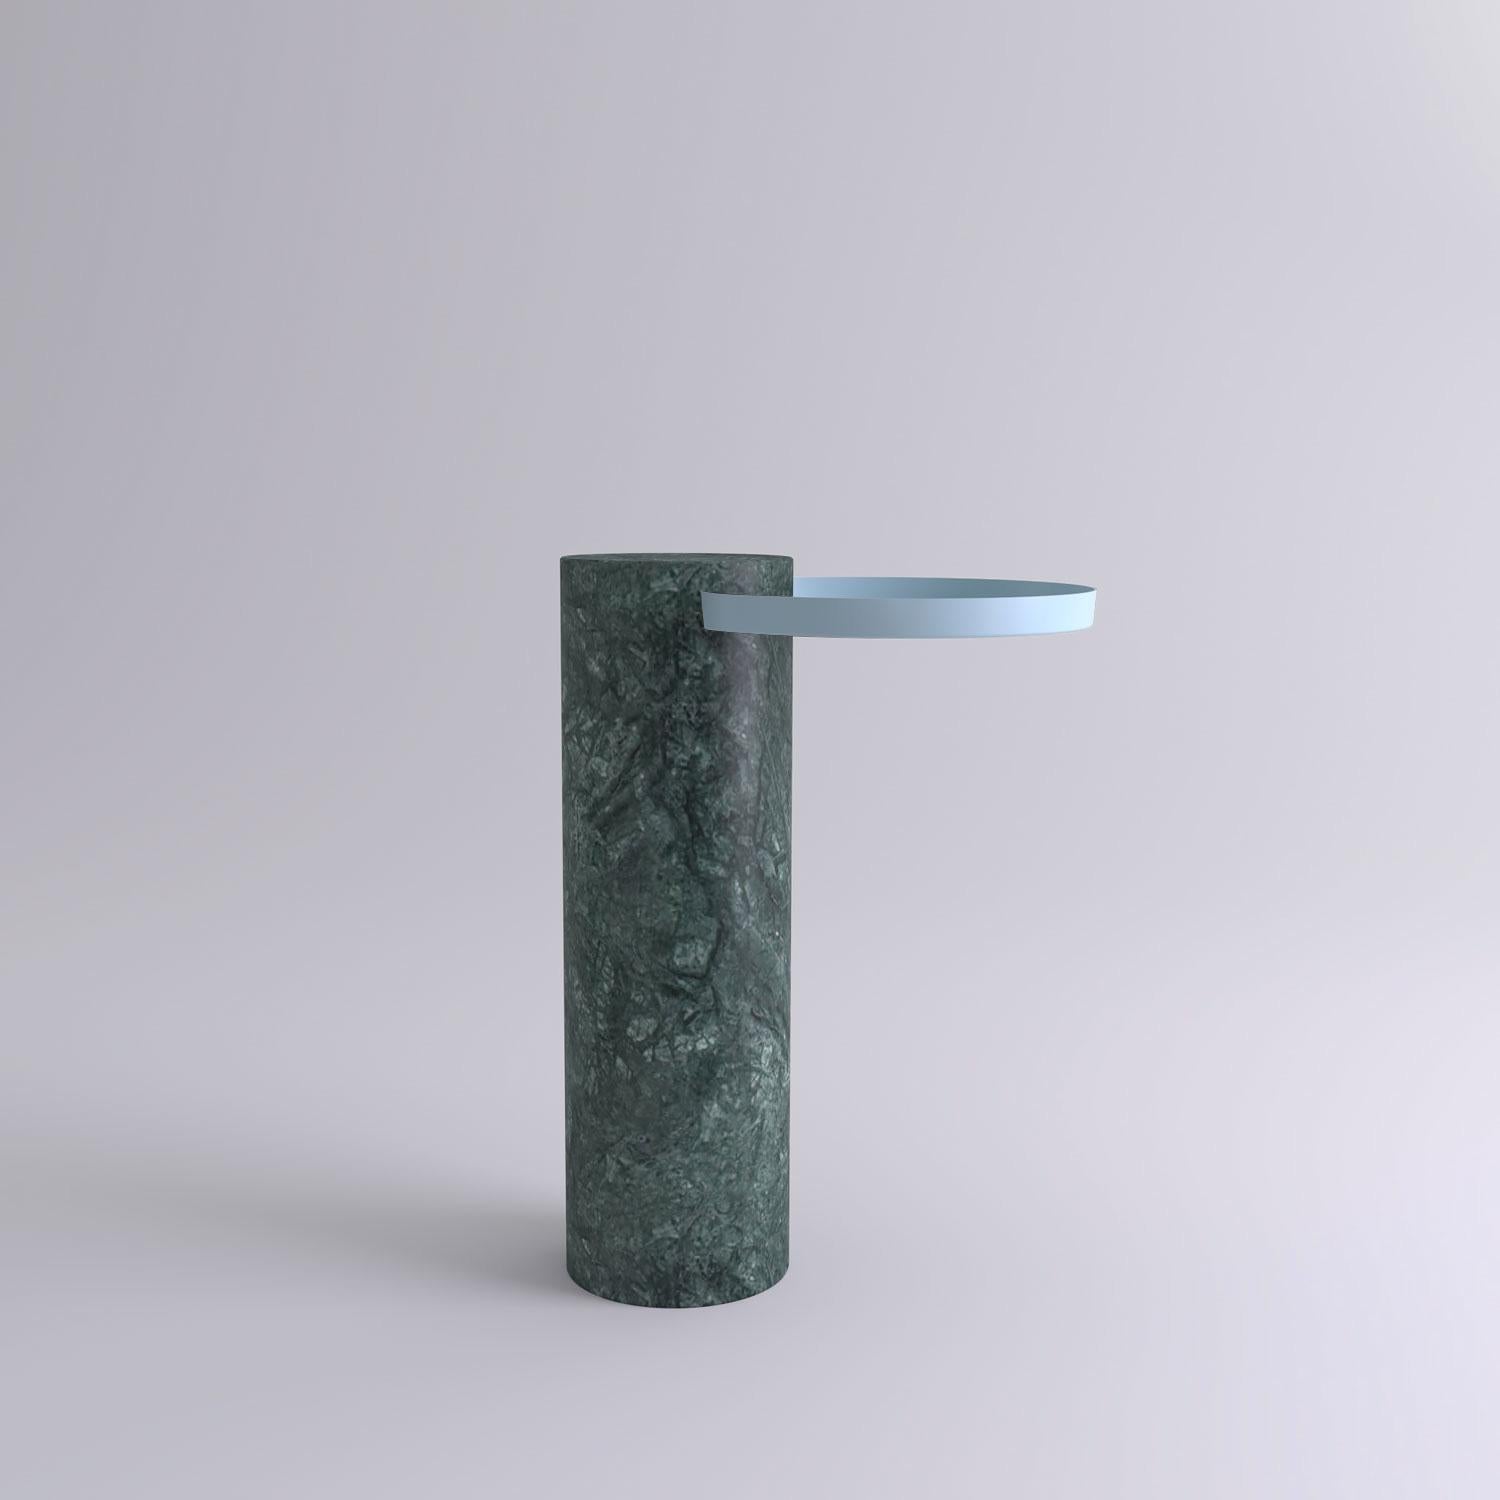 High indian green marble contemporary guéridon, Sebastian Herkner
Dimensions: D 42 x H 57 cm
Materials: Indian green marble, light blue metal tray

The salute table exists in 3 sizes, 4 different marble stones for the column and 5 different